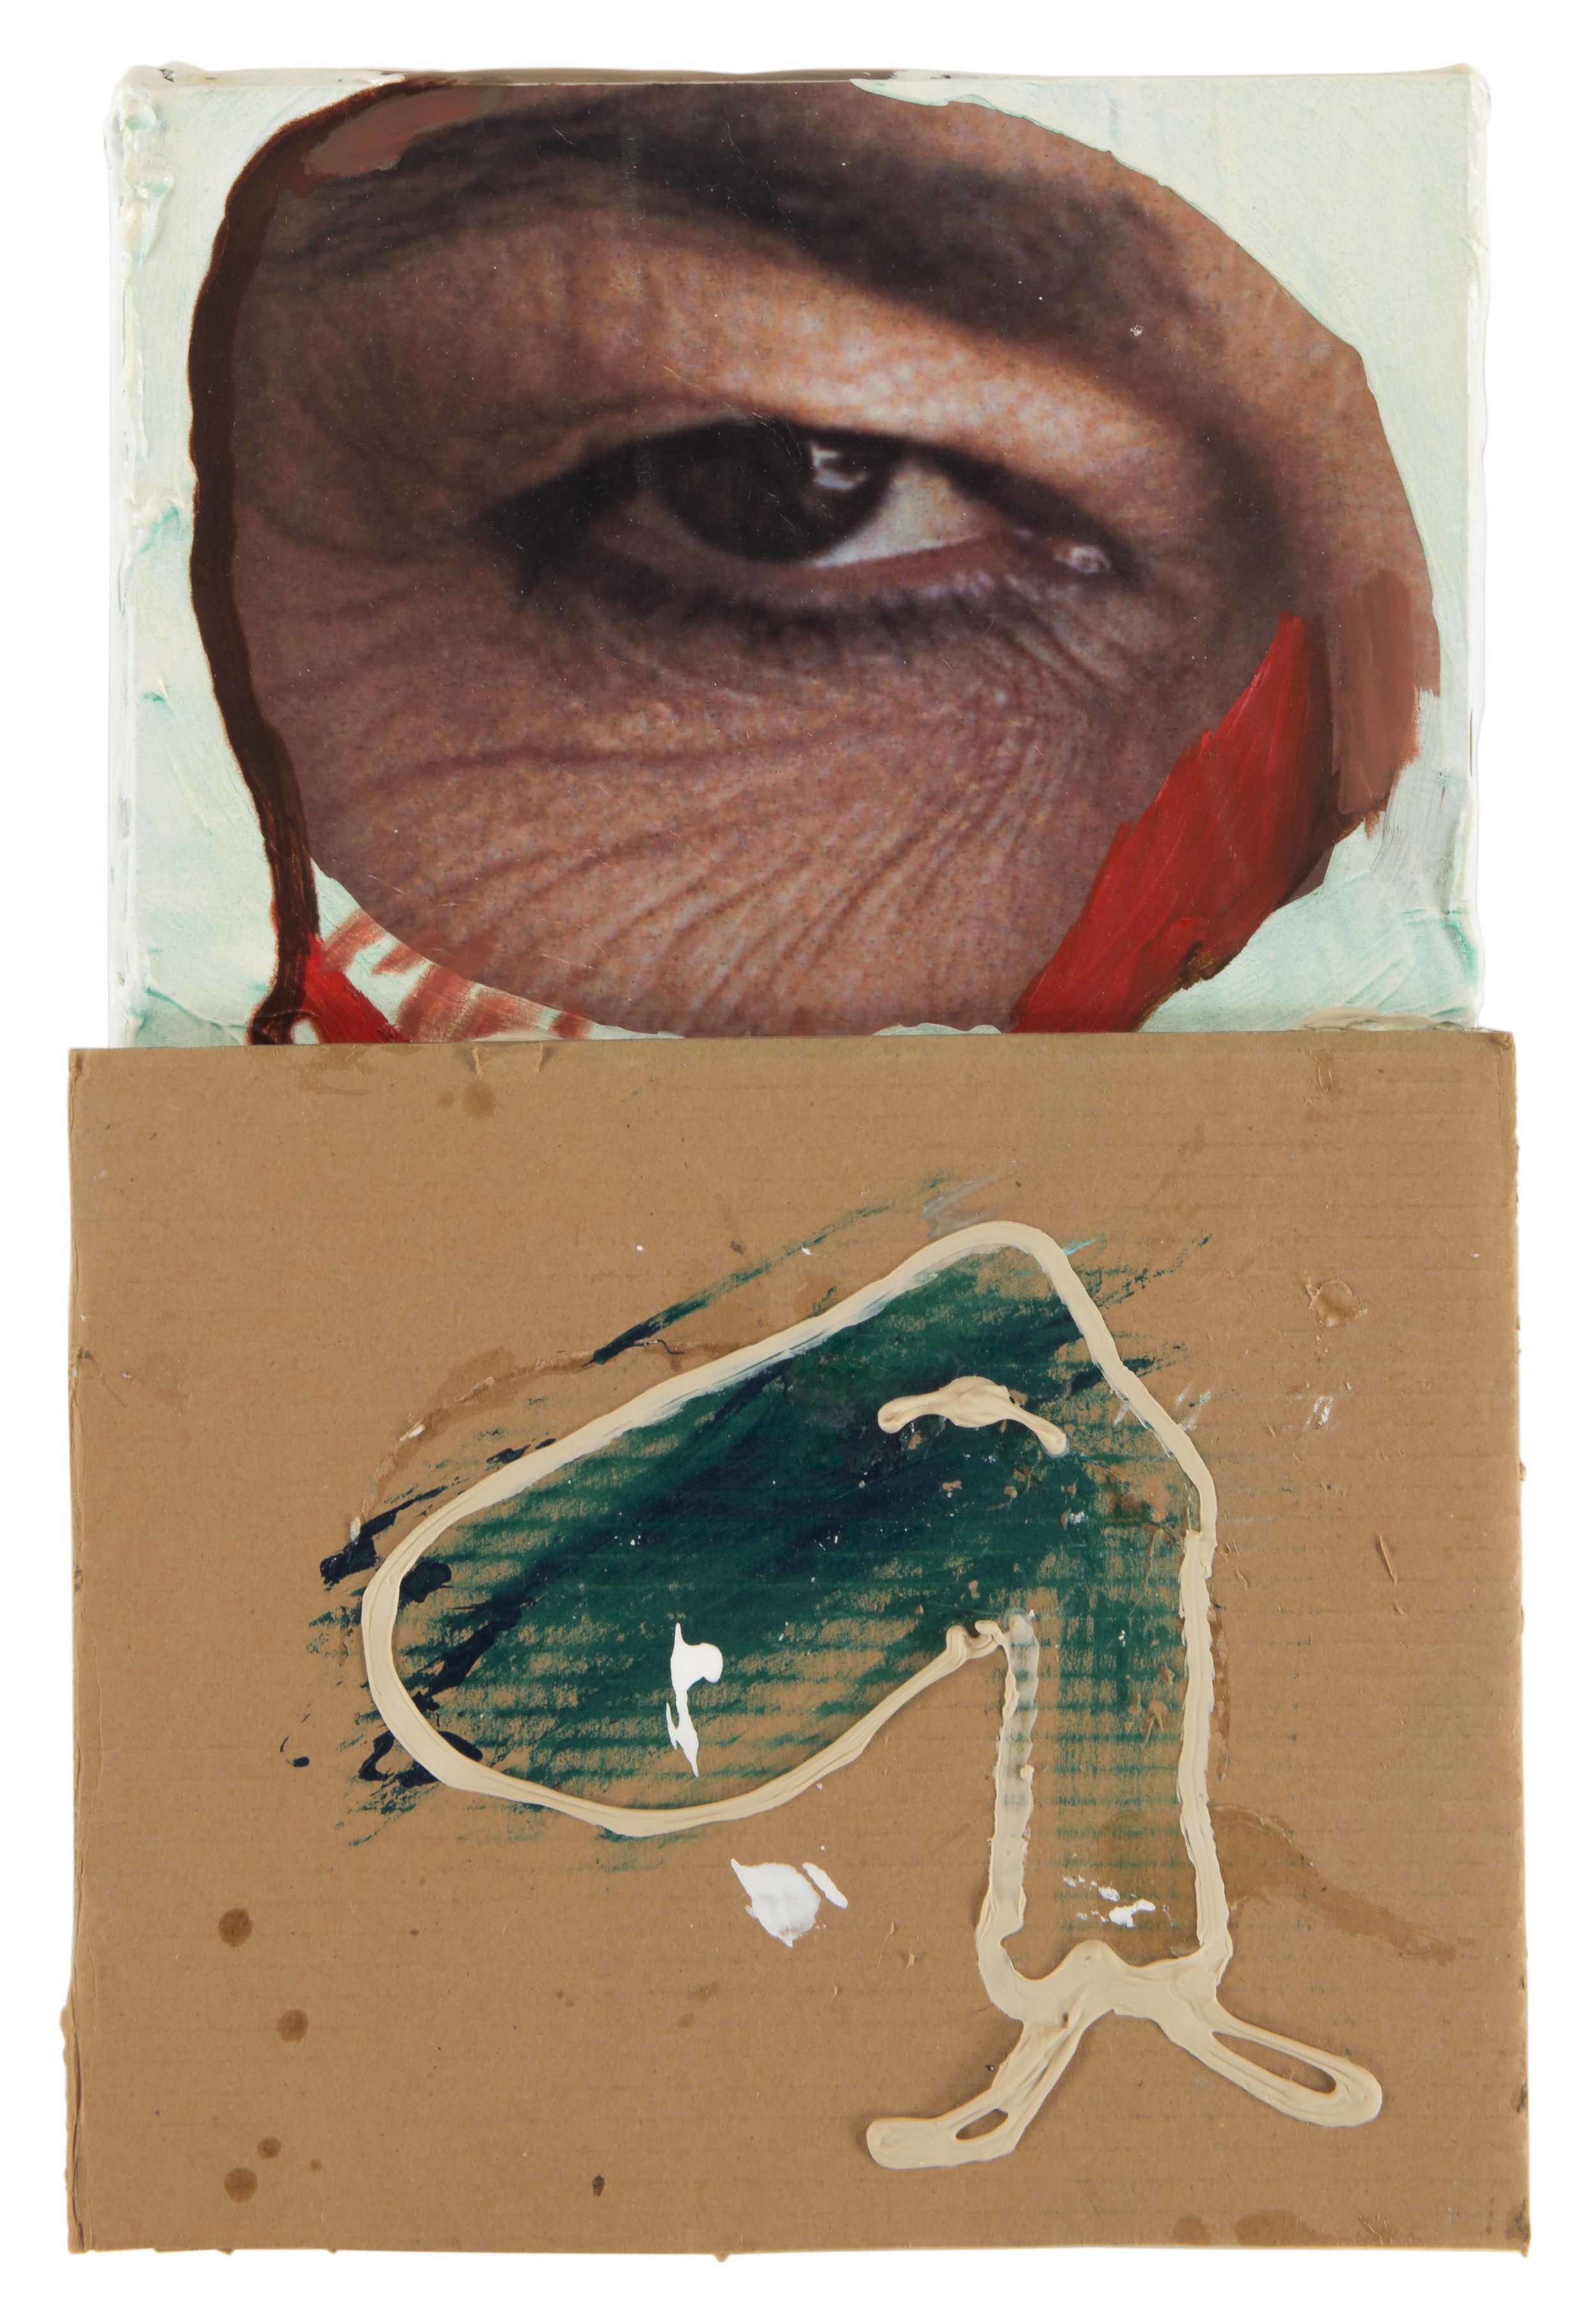  Drew Beattie  Sergeant Sergeant &nbsp; 2010 acrylic, liquid nails, collage and cardboard on canvas 17½ x 11¾ inches 